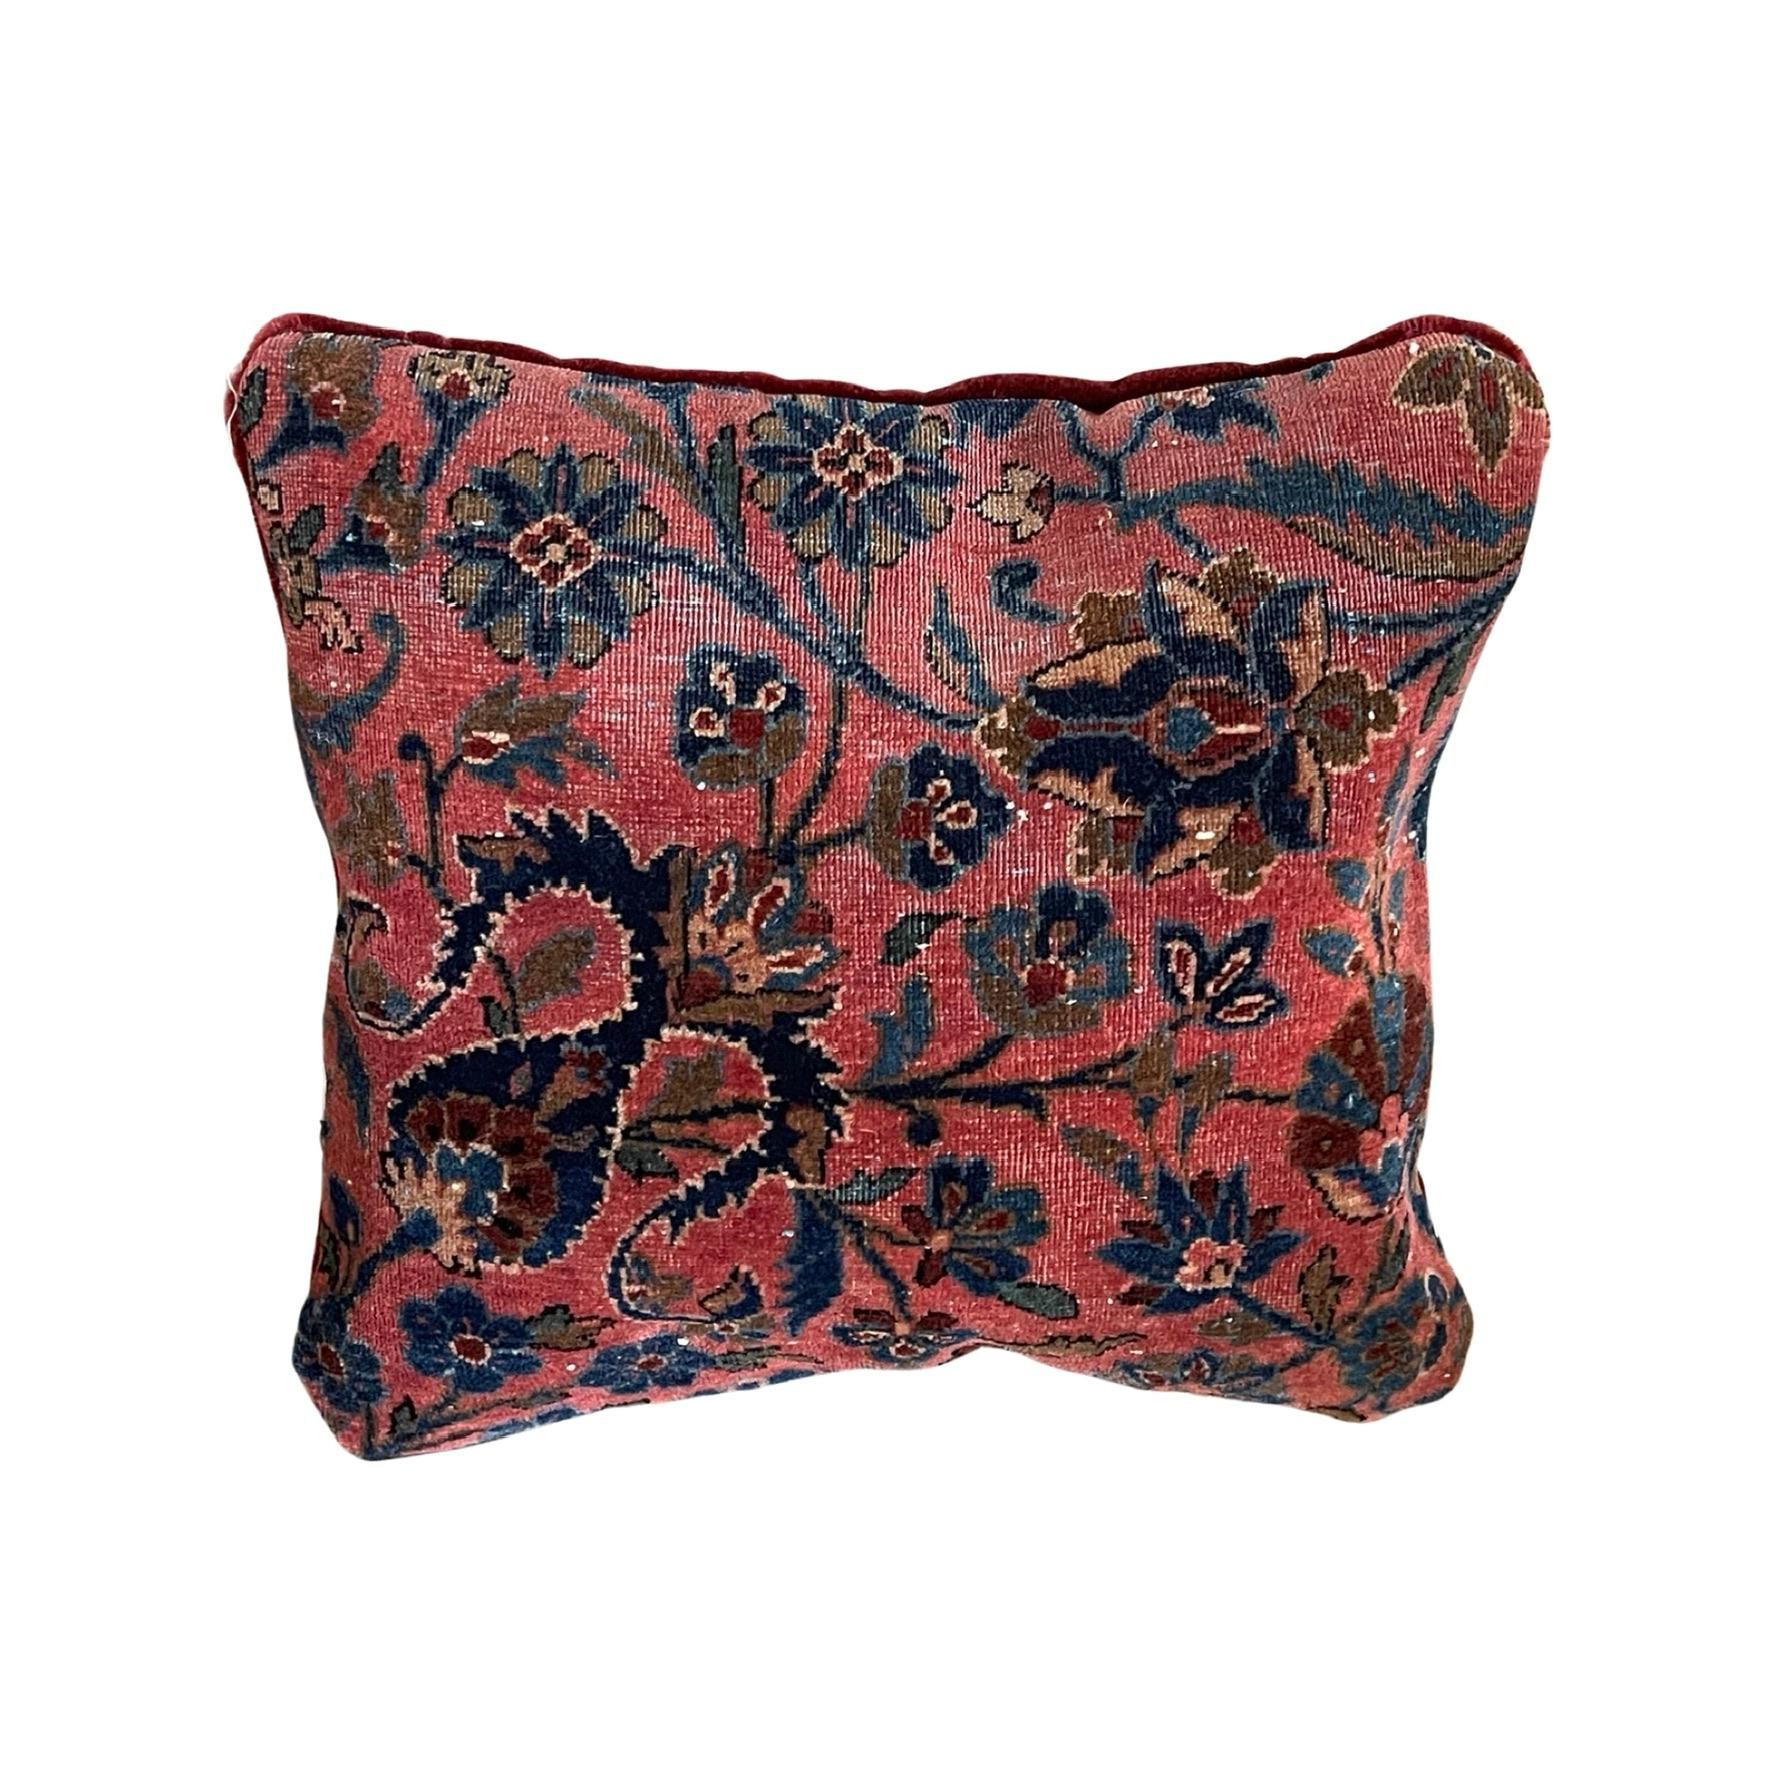 Bring charm of an antique rug into areas other than your floor! This pillow which was made using an antique Persian rug from the early 1900’s comes stuffed with cotton filling and backing is as shown in the pictures with an accessible zipper to